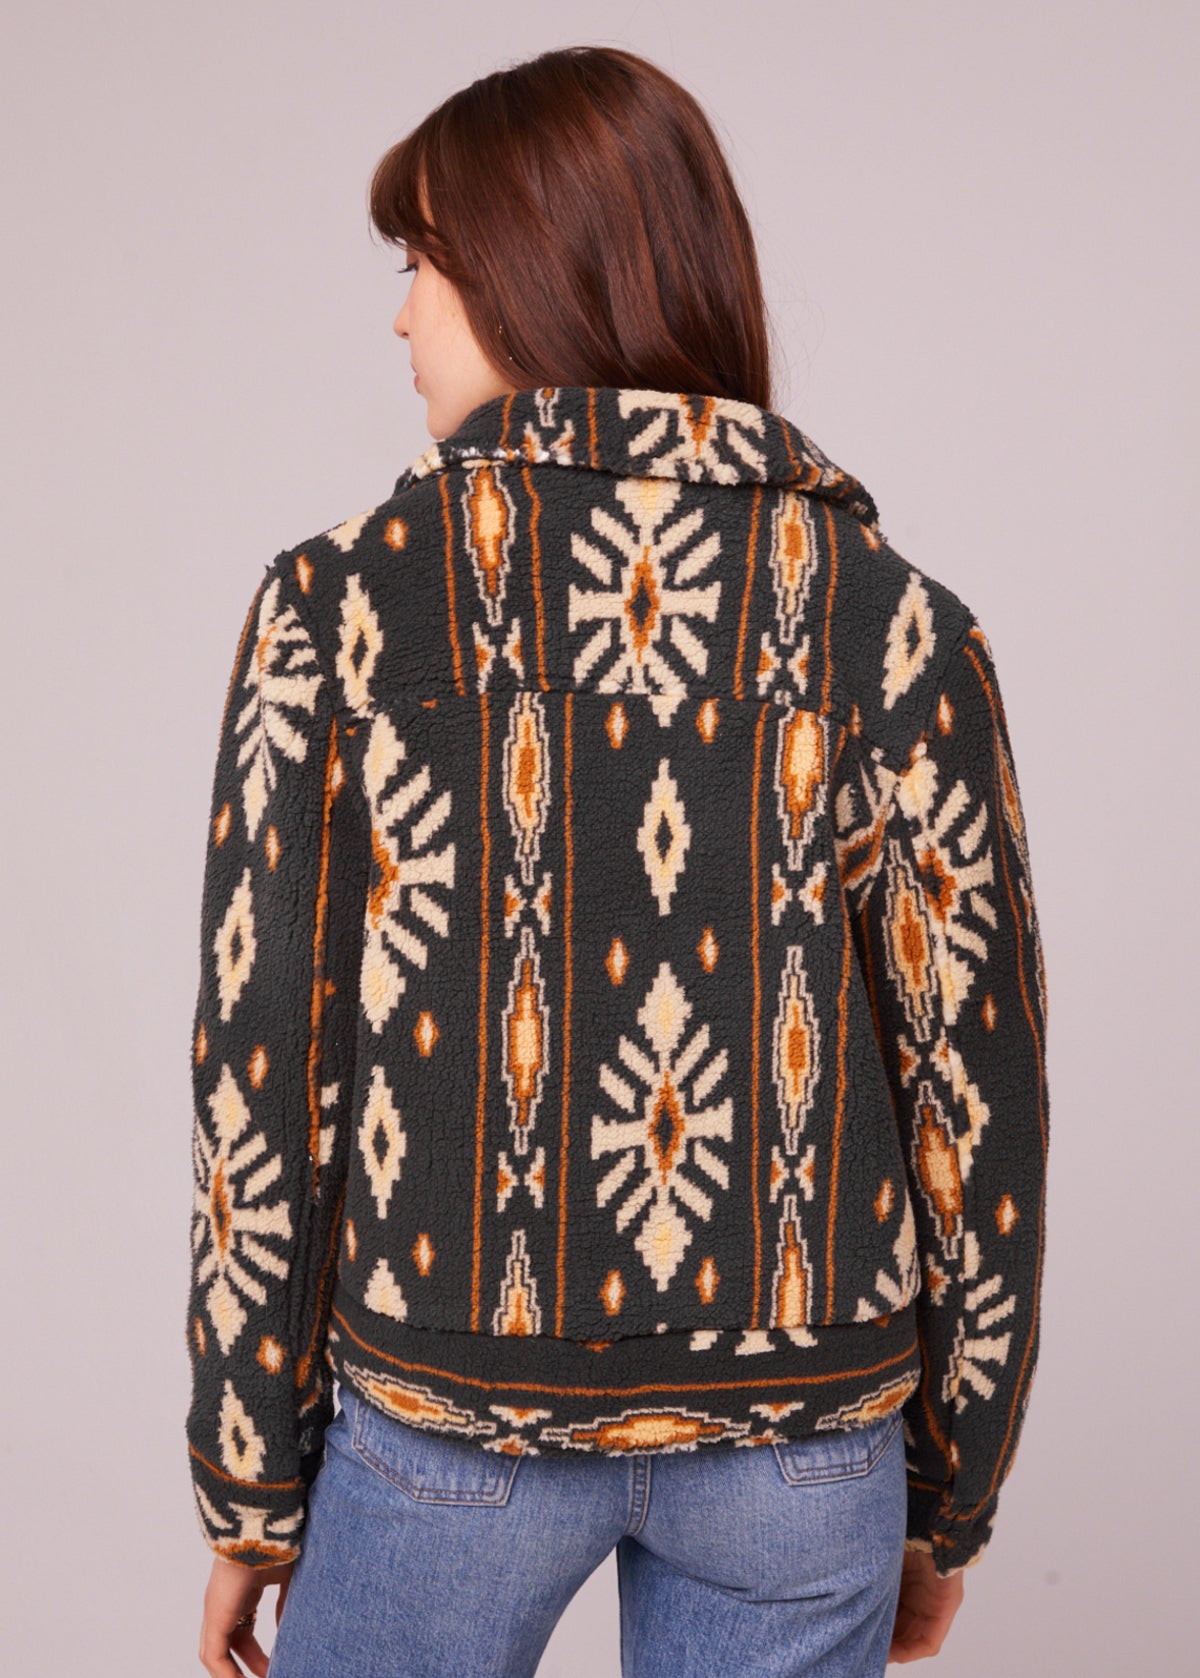 70s inspired charcoal grey and mustard orange faux sherpa shearling Southwest Print jacket with zip front and collar by Band of the Free